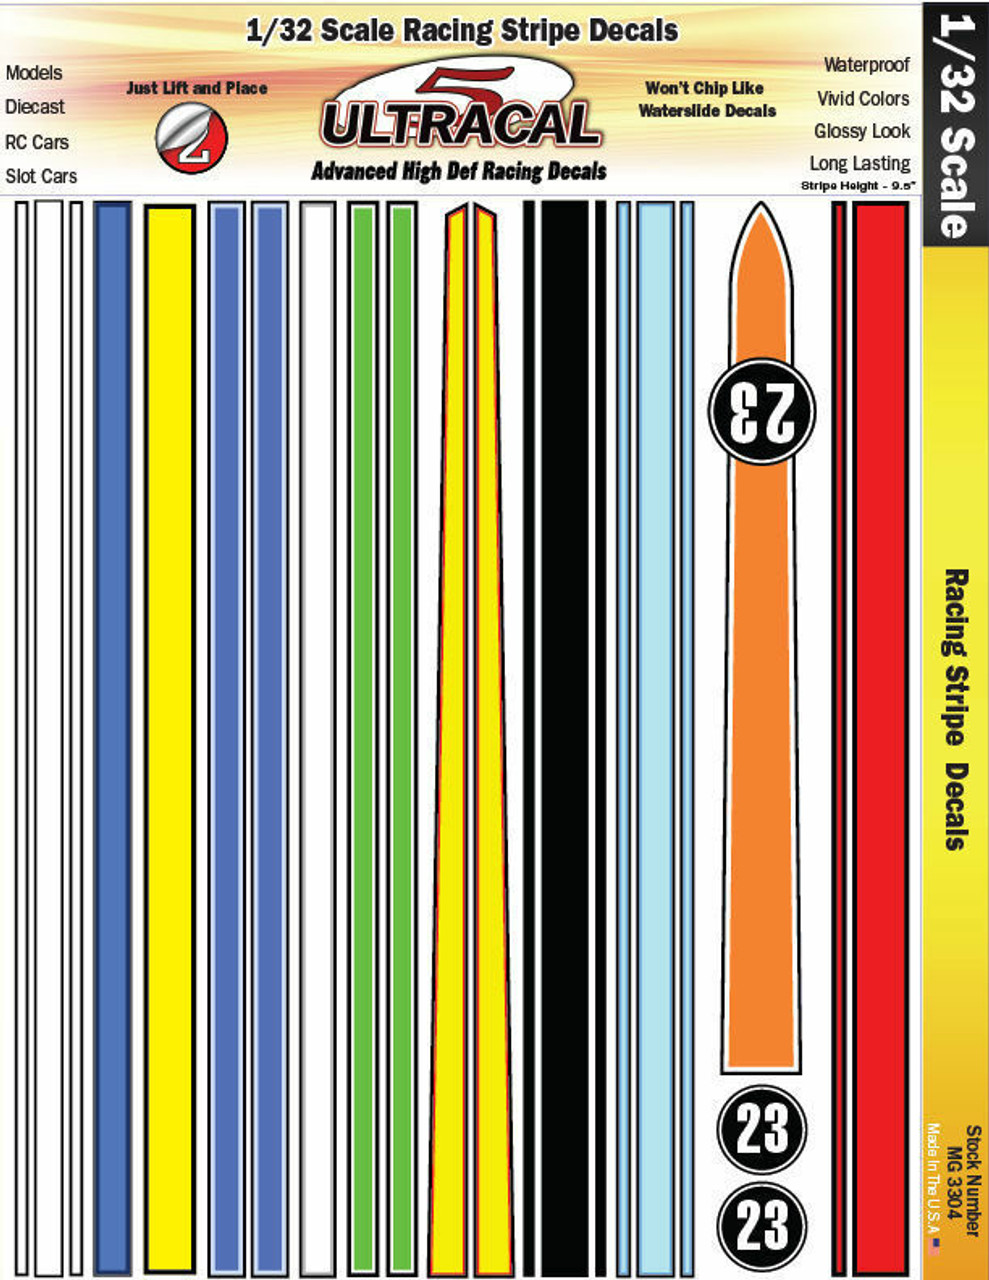 Ultracal 3304 - 1/32 DECALS - Racing Stripes